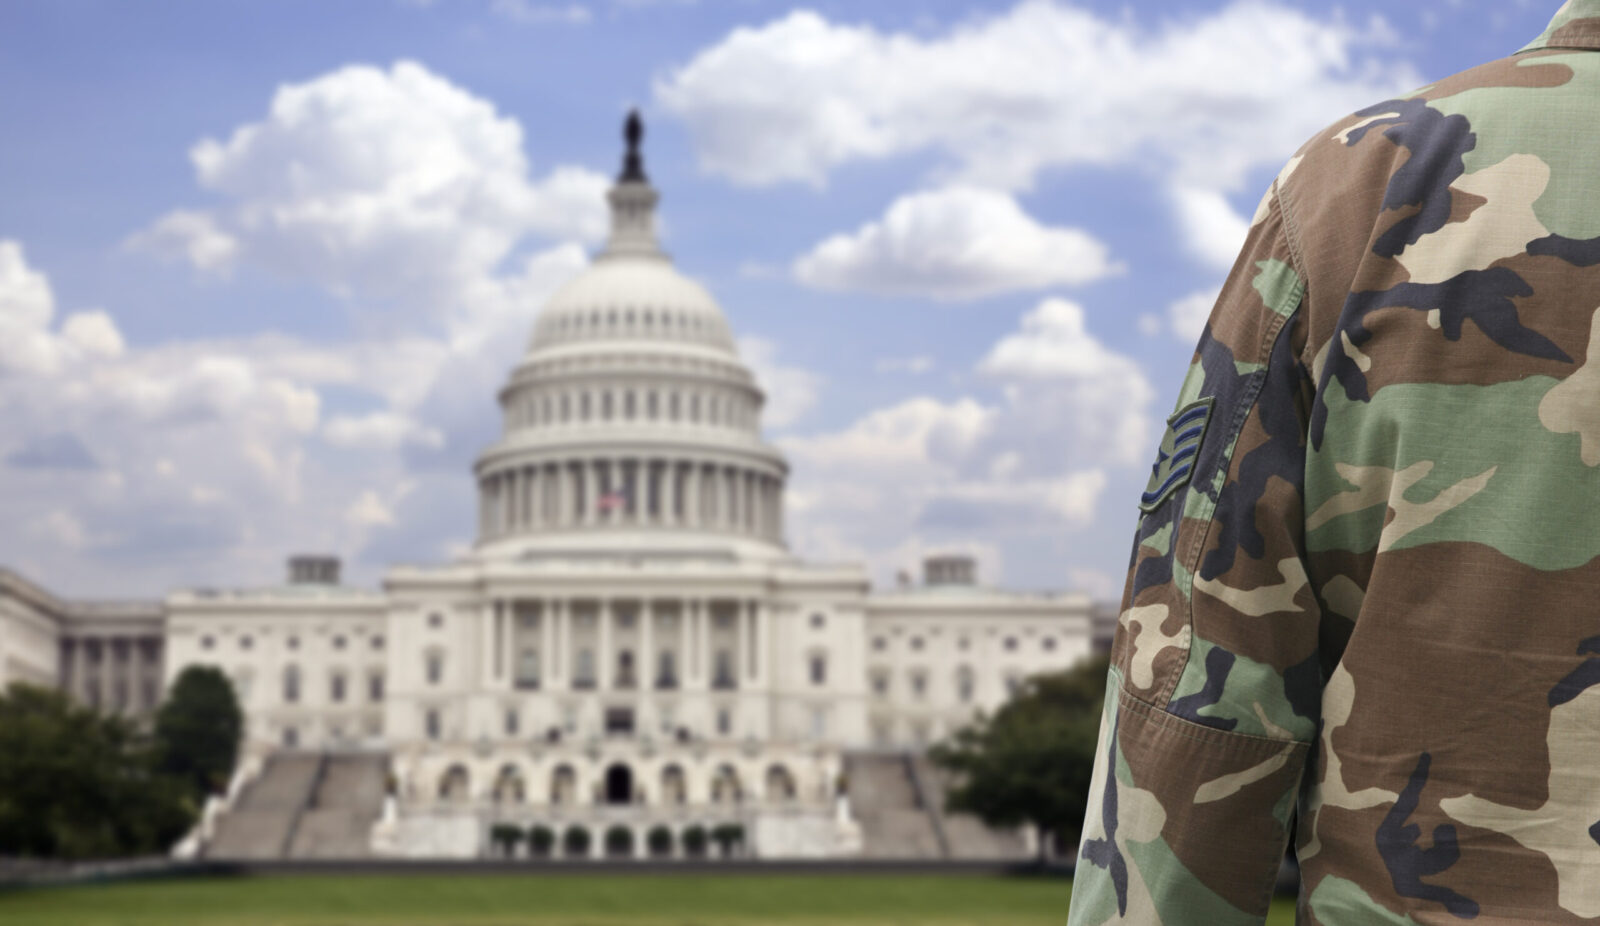 Military soldier in front of U.S. capitol